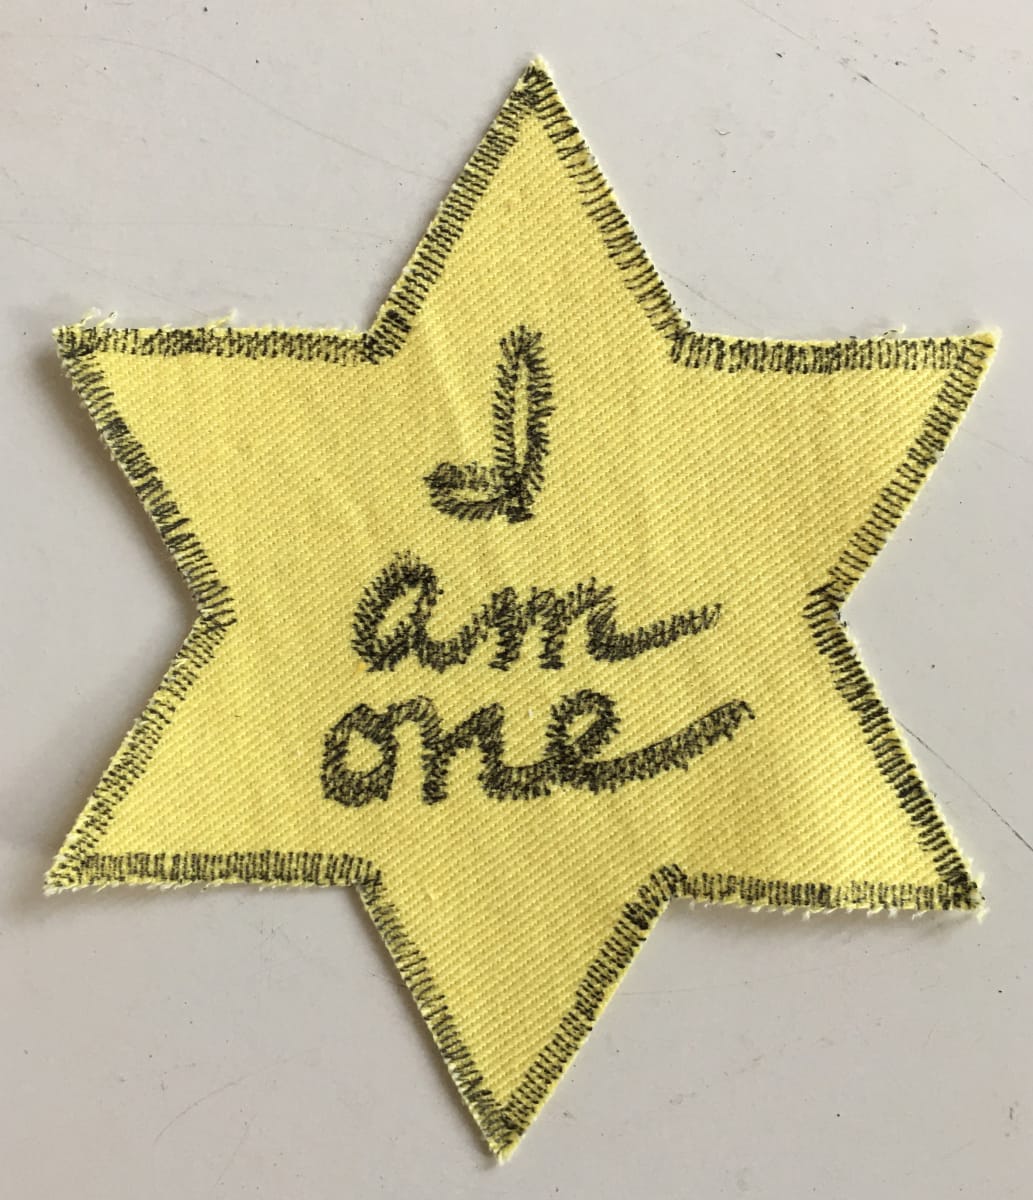 I Am One by Marilyn Banner 